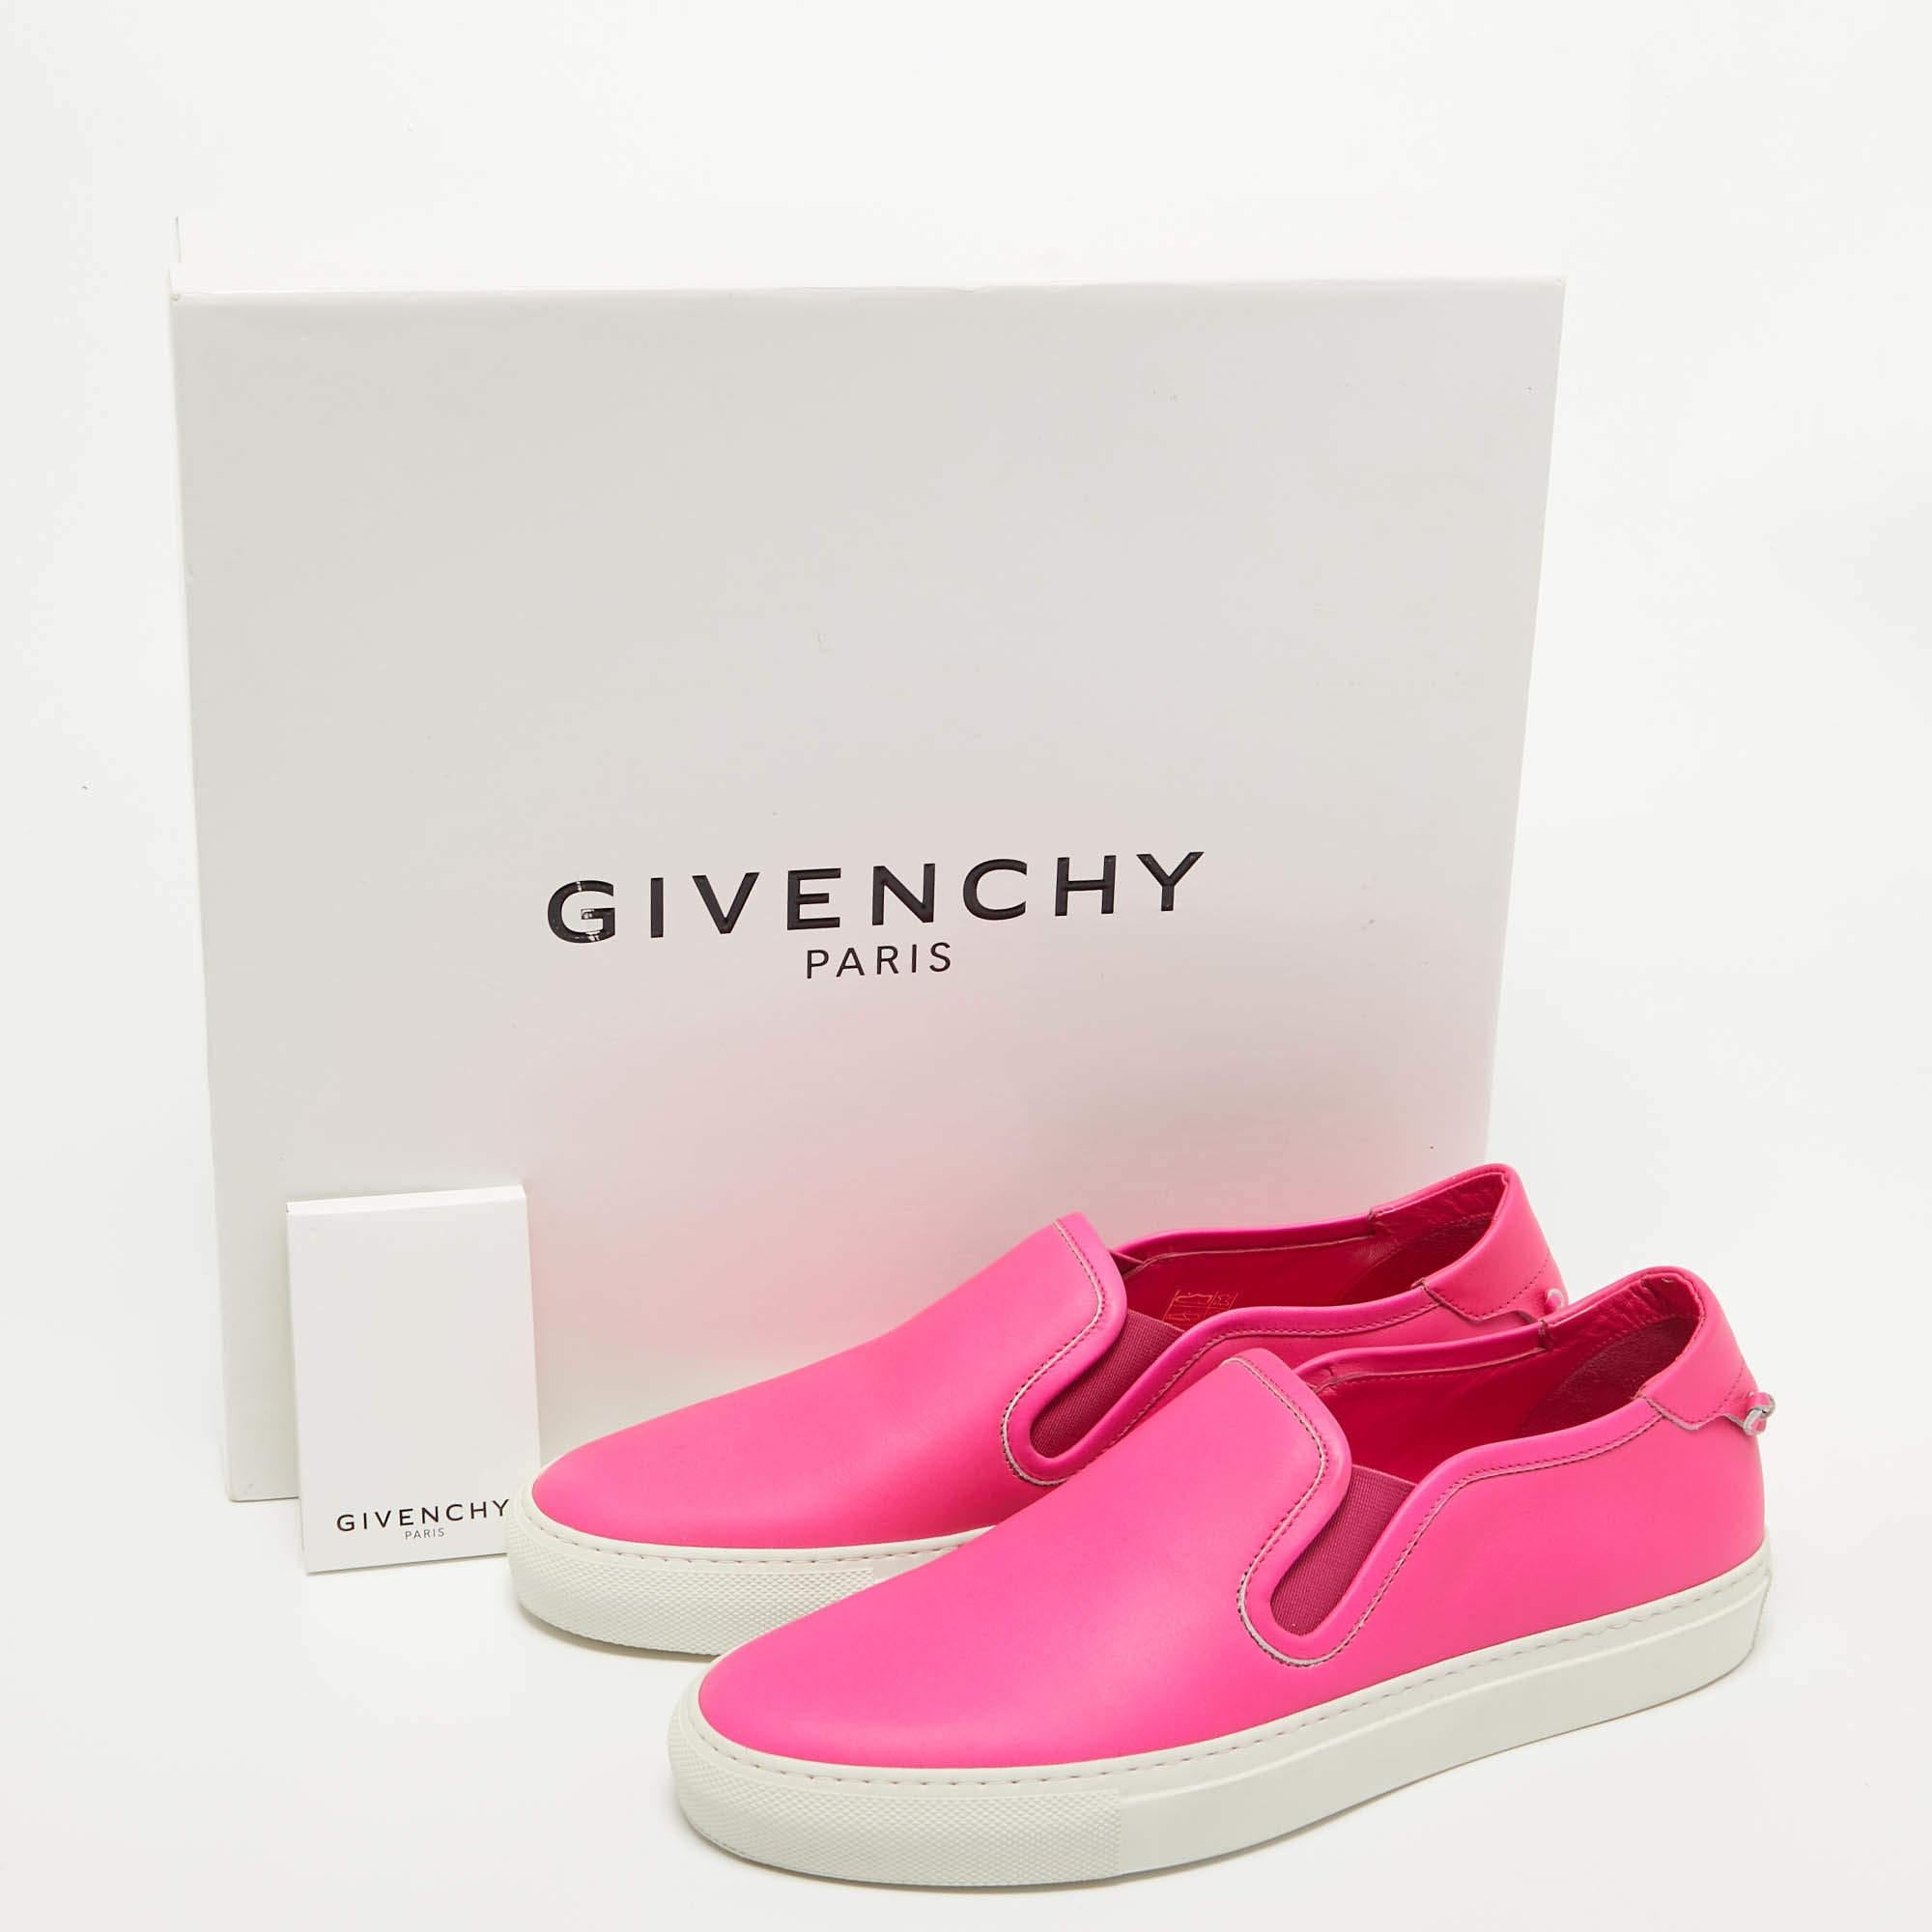 Givenchy Pink Leather Slip On Sneakers Size 40 In Excellent Condition For Sale In Dubai, Al Qouz 2